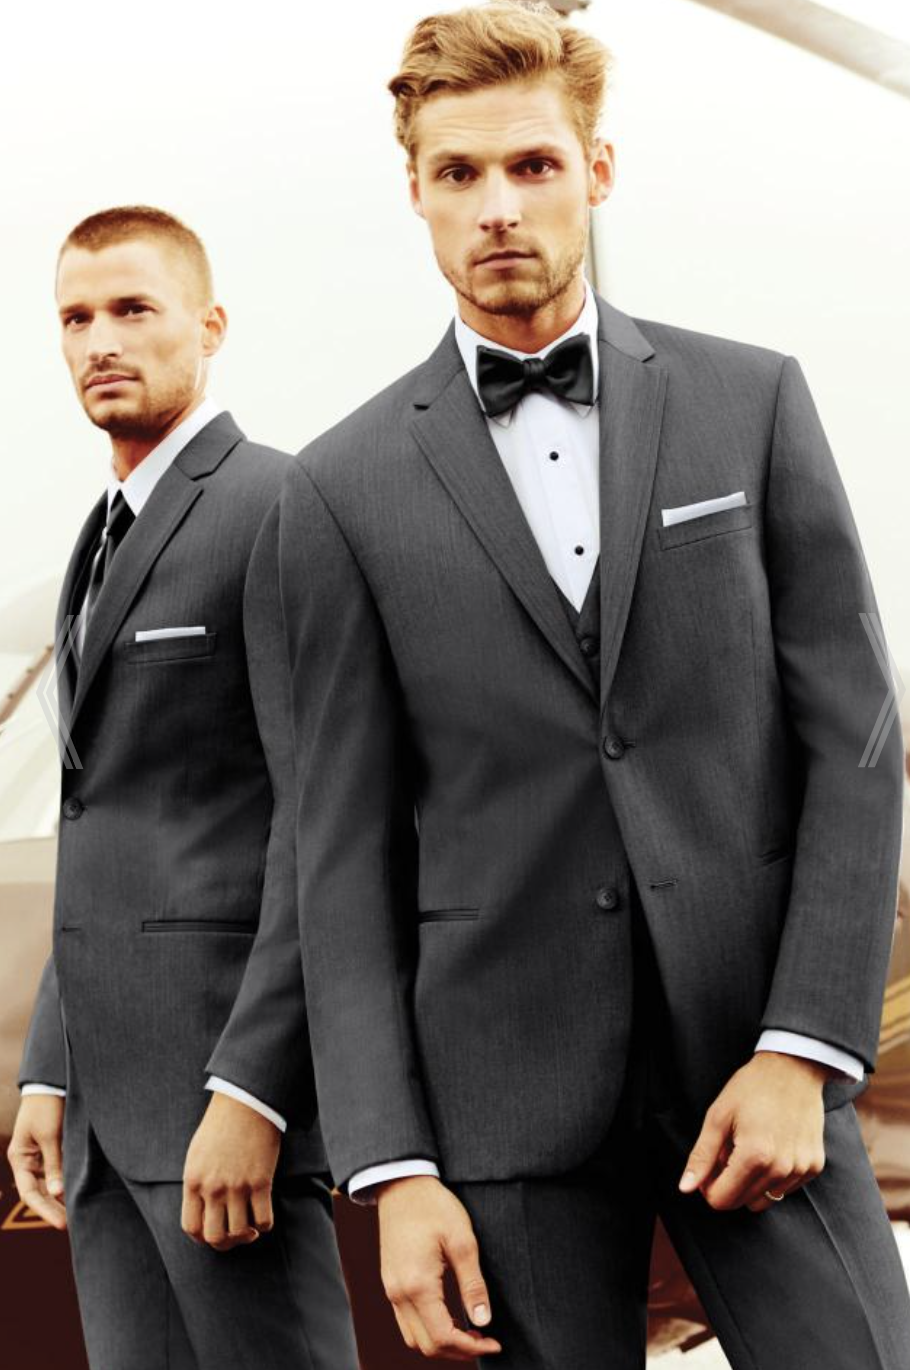 Steel Grey Sterling Wedding Suit Shown with bow tie